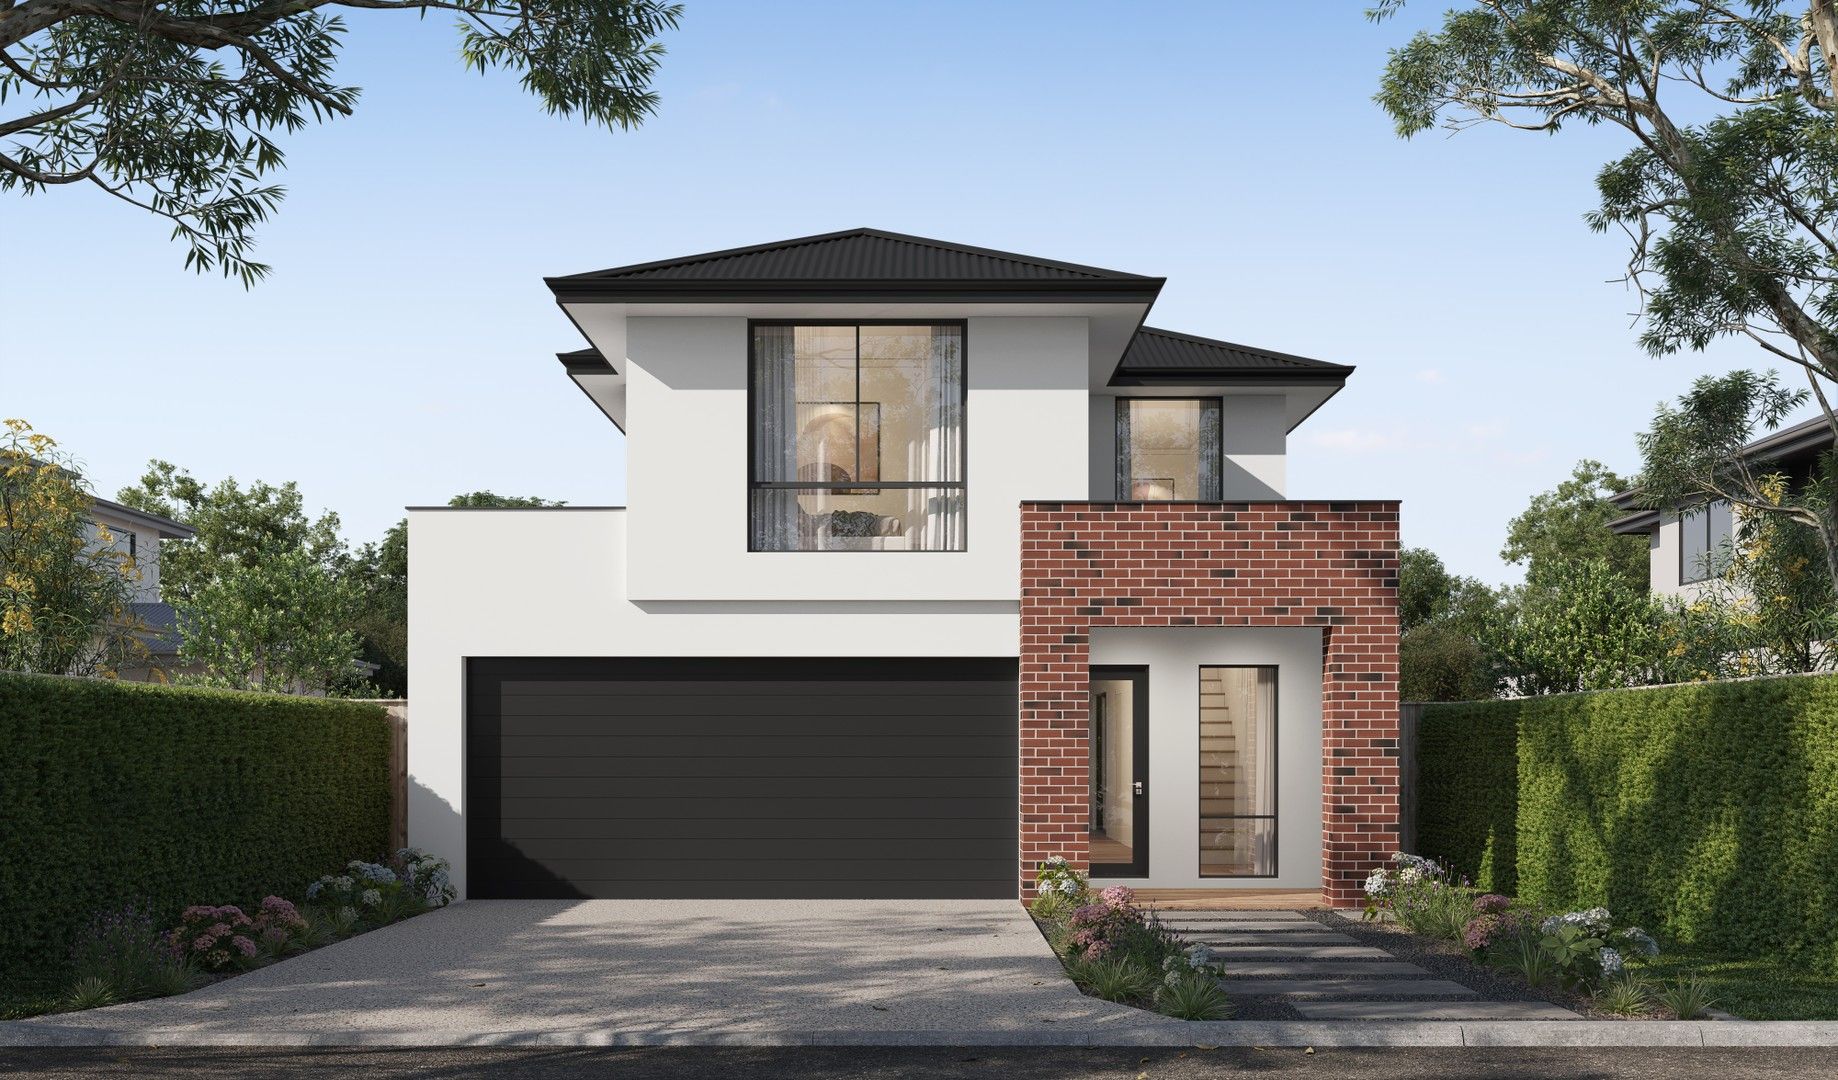 4 bedrooms New House & Land in Lot 10 Ingles Place BAYSWATER WA, 6053